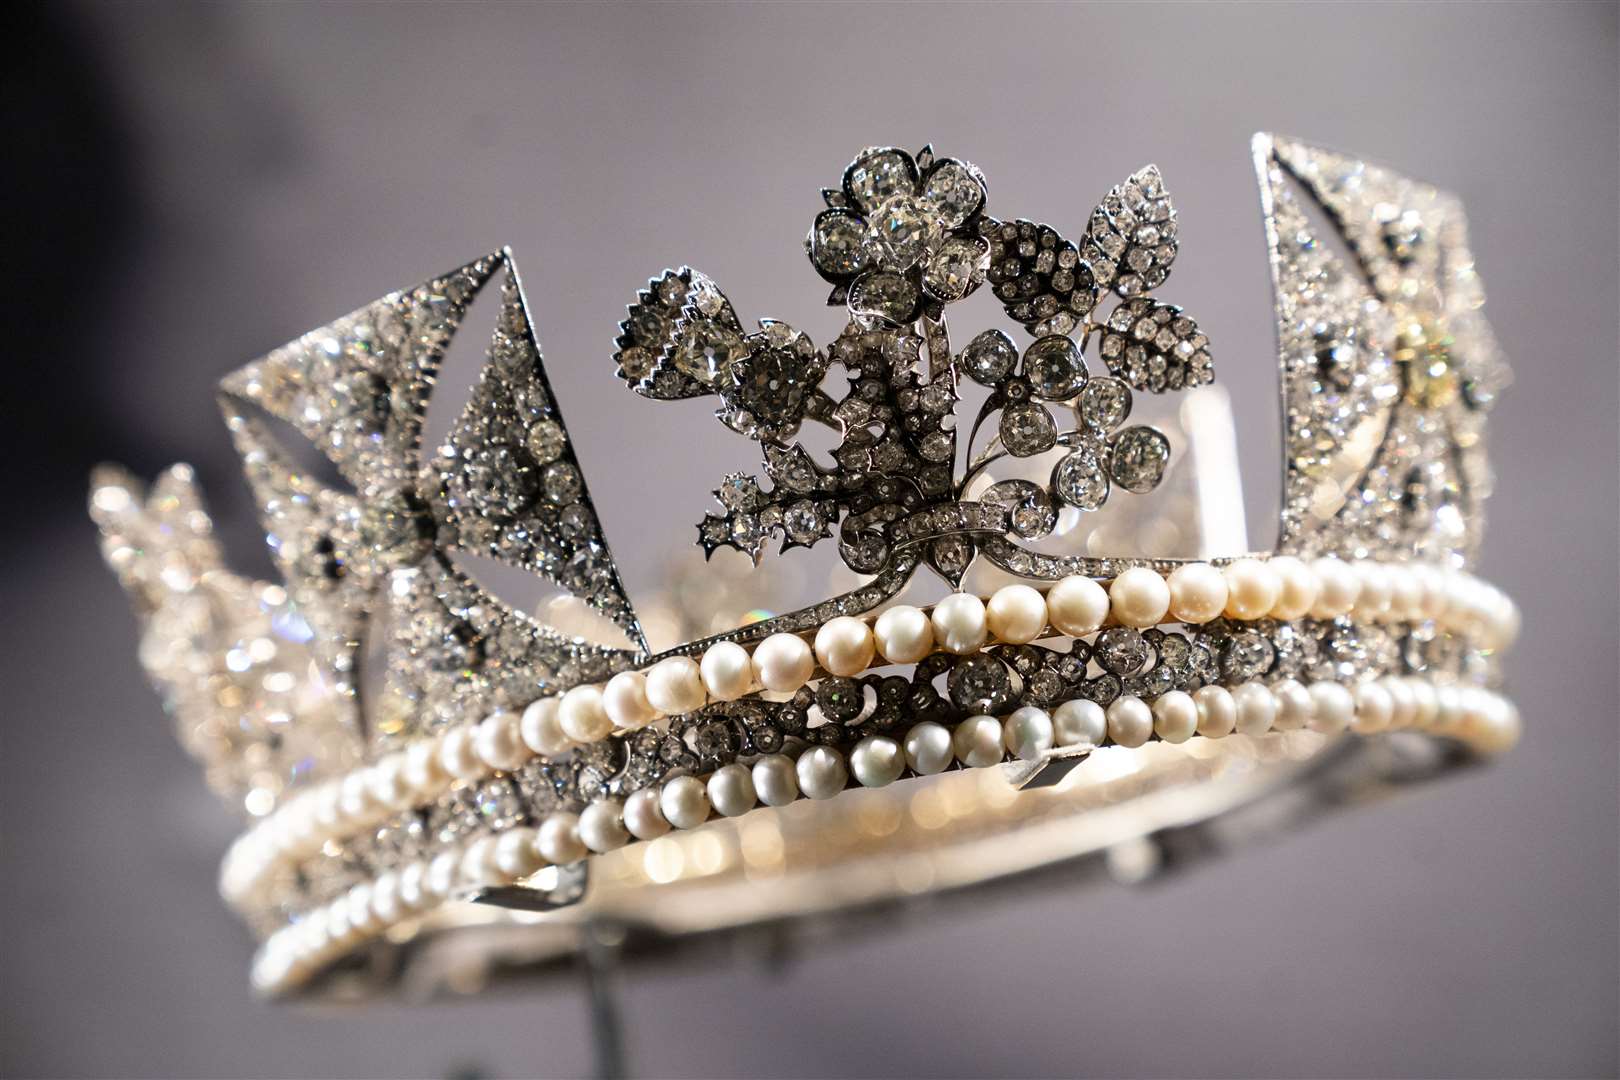 The Queen’s Diamond Diadem is featured in the news exhibition (Kirsty O’Connor/PA)